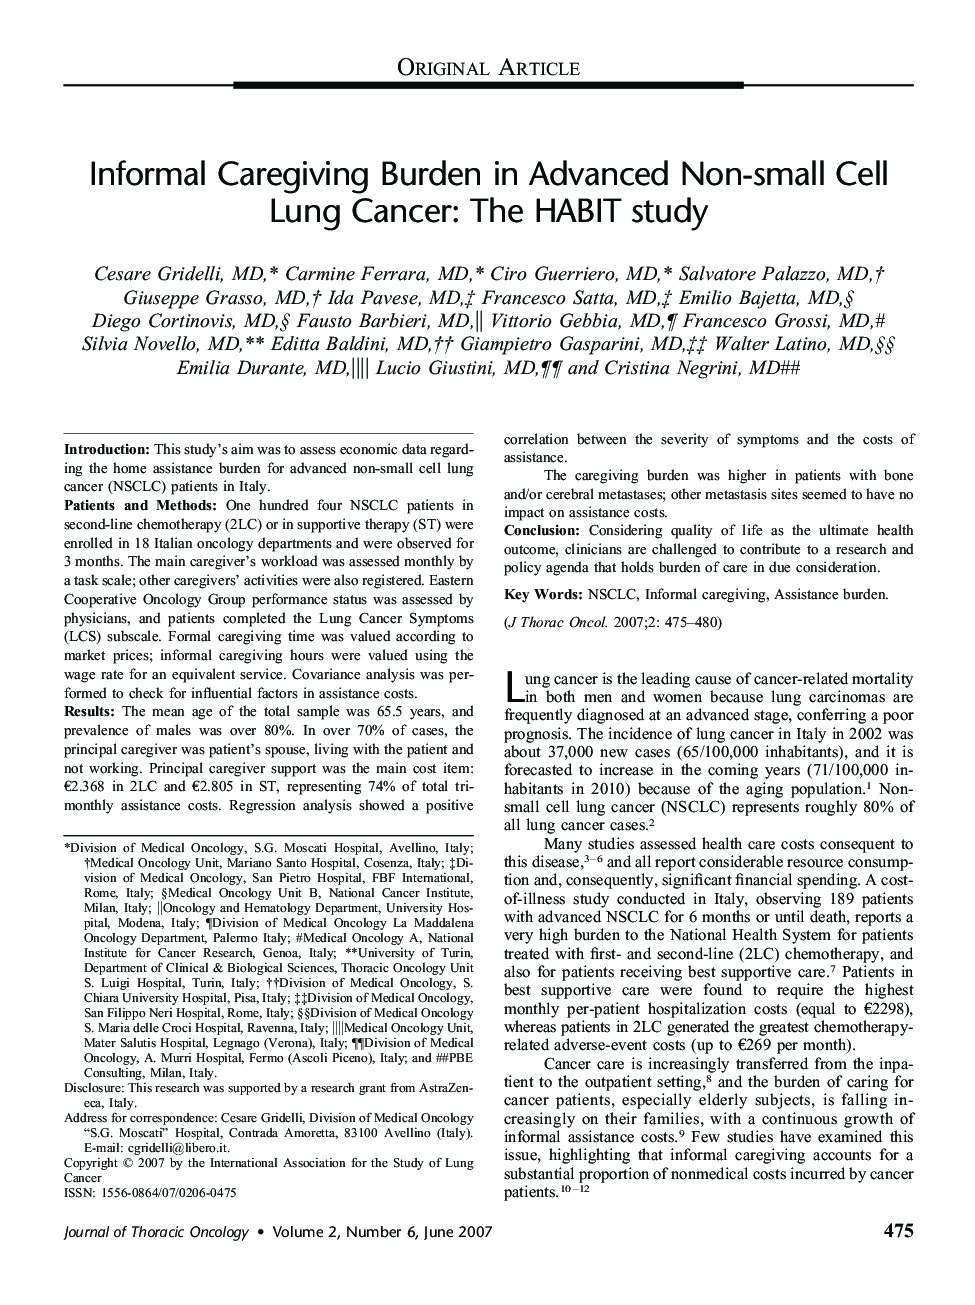 Informal Caregiving Burden in Advanced Non-small Cell Lung Cancer: The HABIT study 